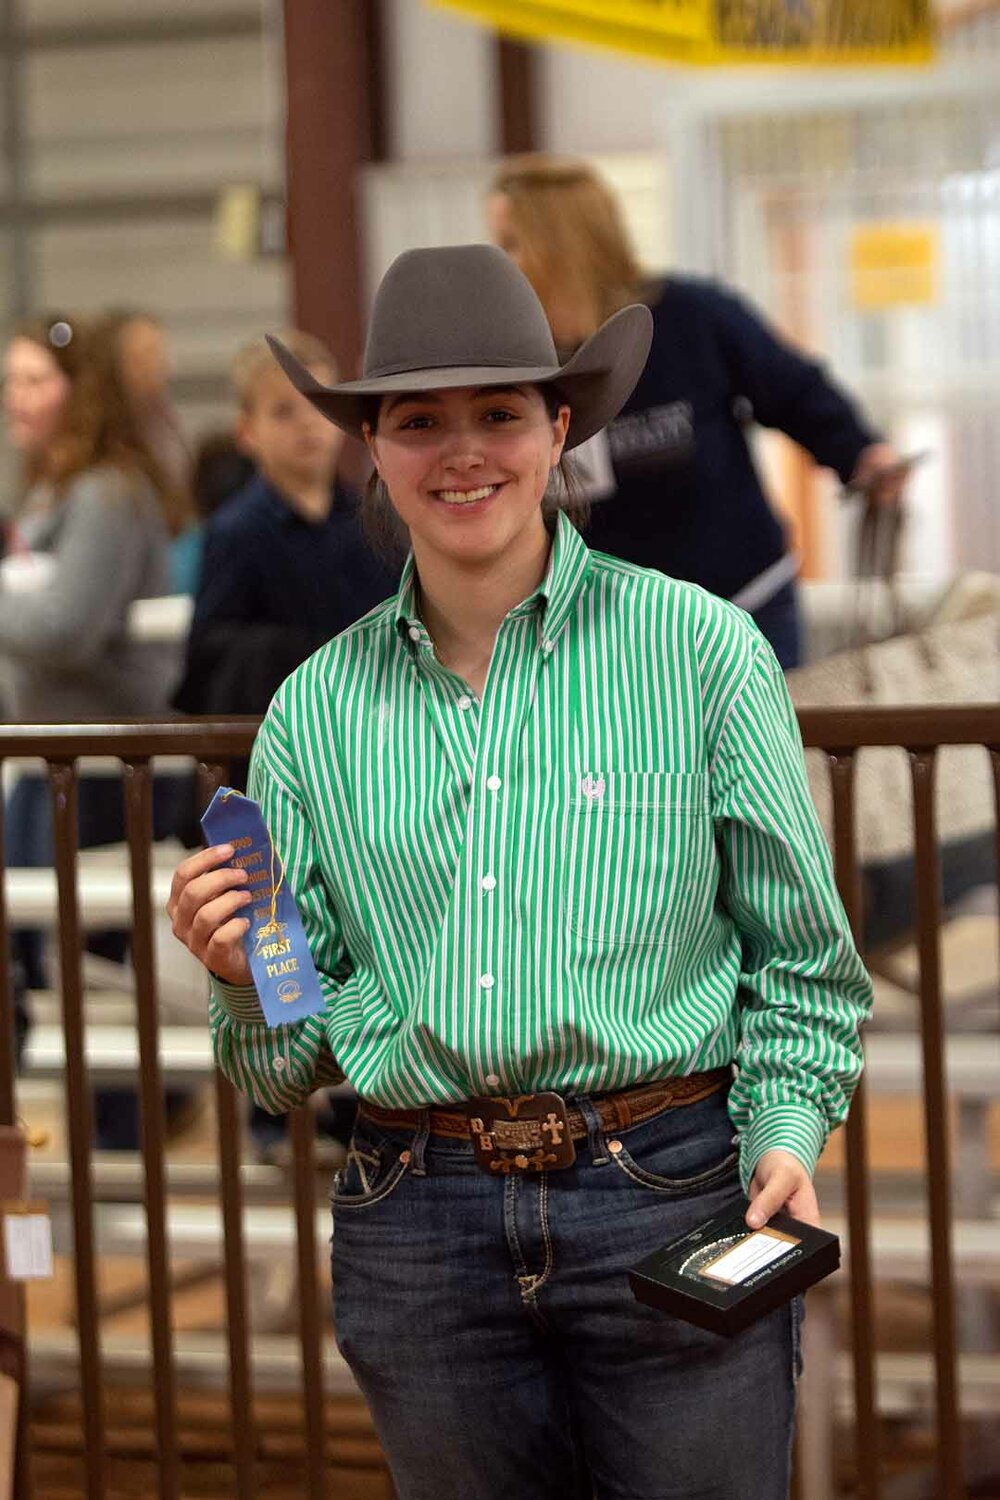 GRAND CHAMPION: Cornerstone 4H member Dakota Becker is the grand champion of the Skill-a-thon at the 67th annual Hood County Junior Livestock Show. 